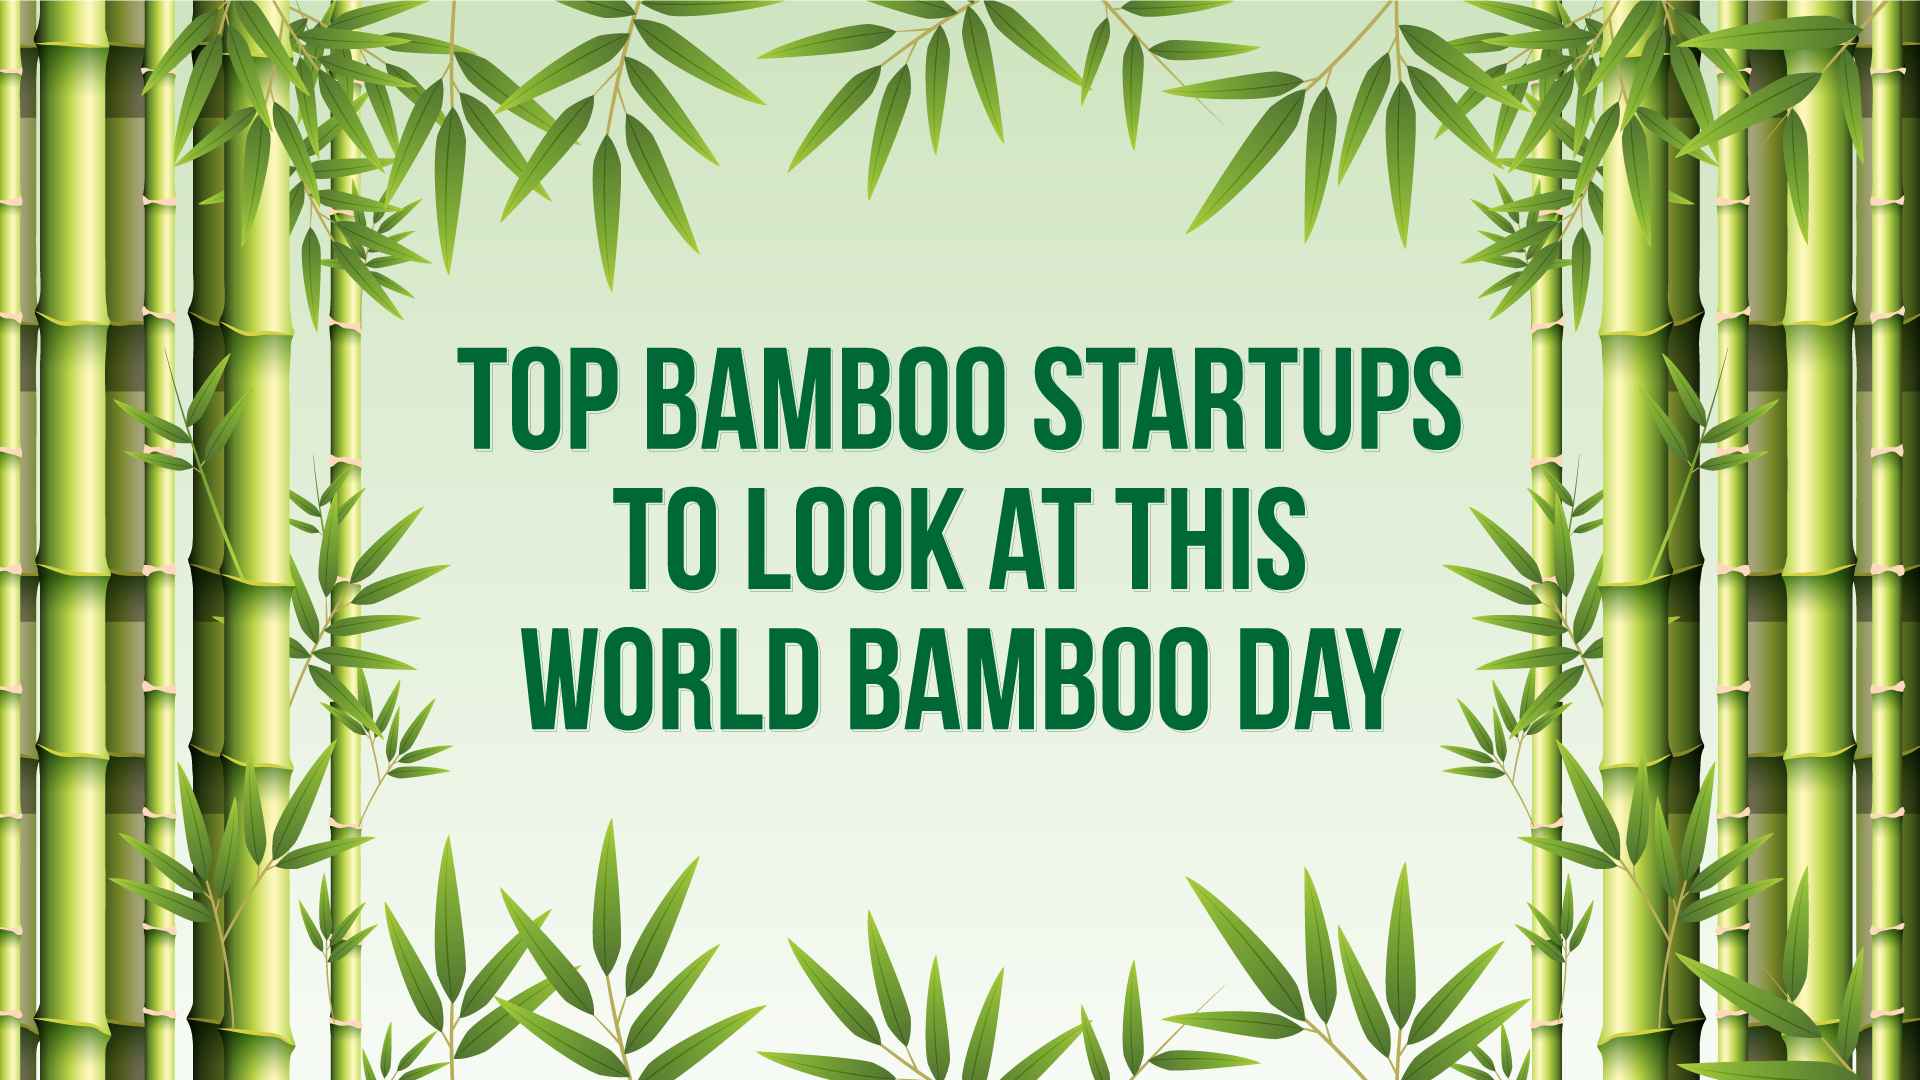 On World Bamboo Day, a look at some startups building sustainable products